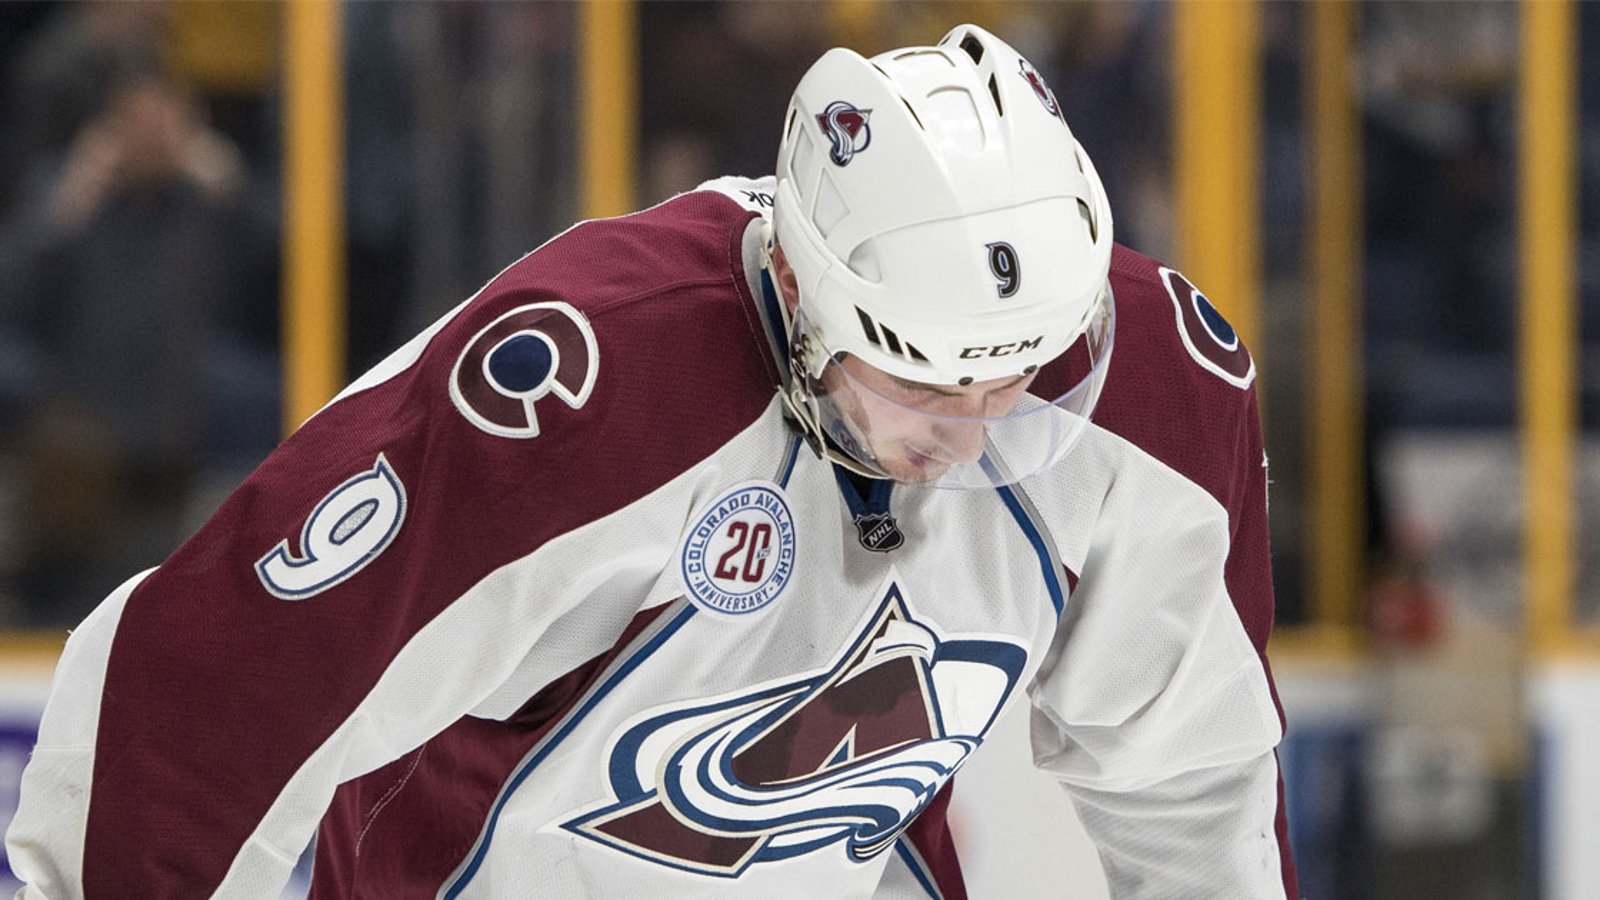 Report: the Avalanche could lose another star player if they can’t trade Duchene!